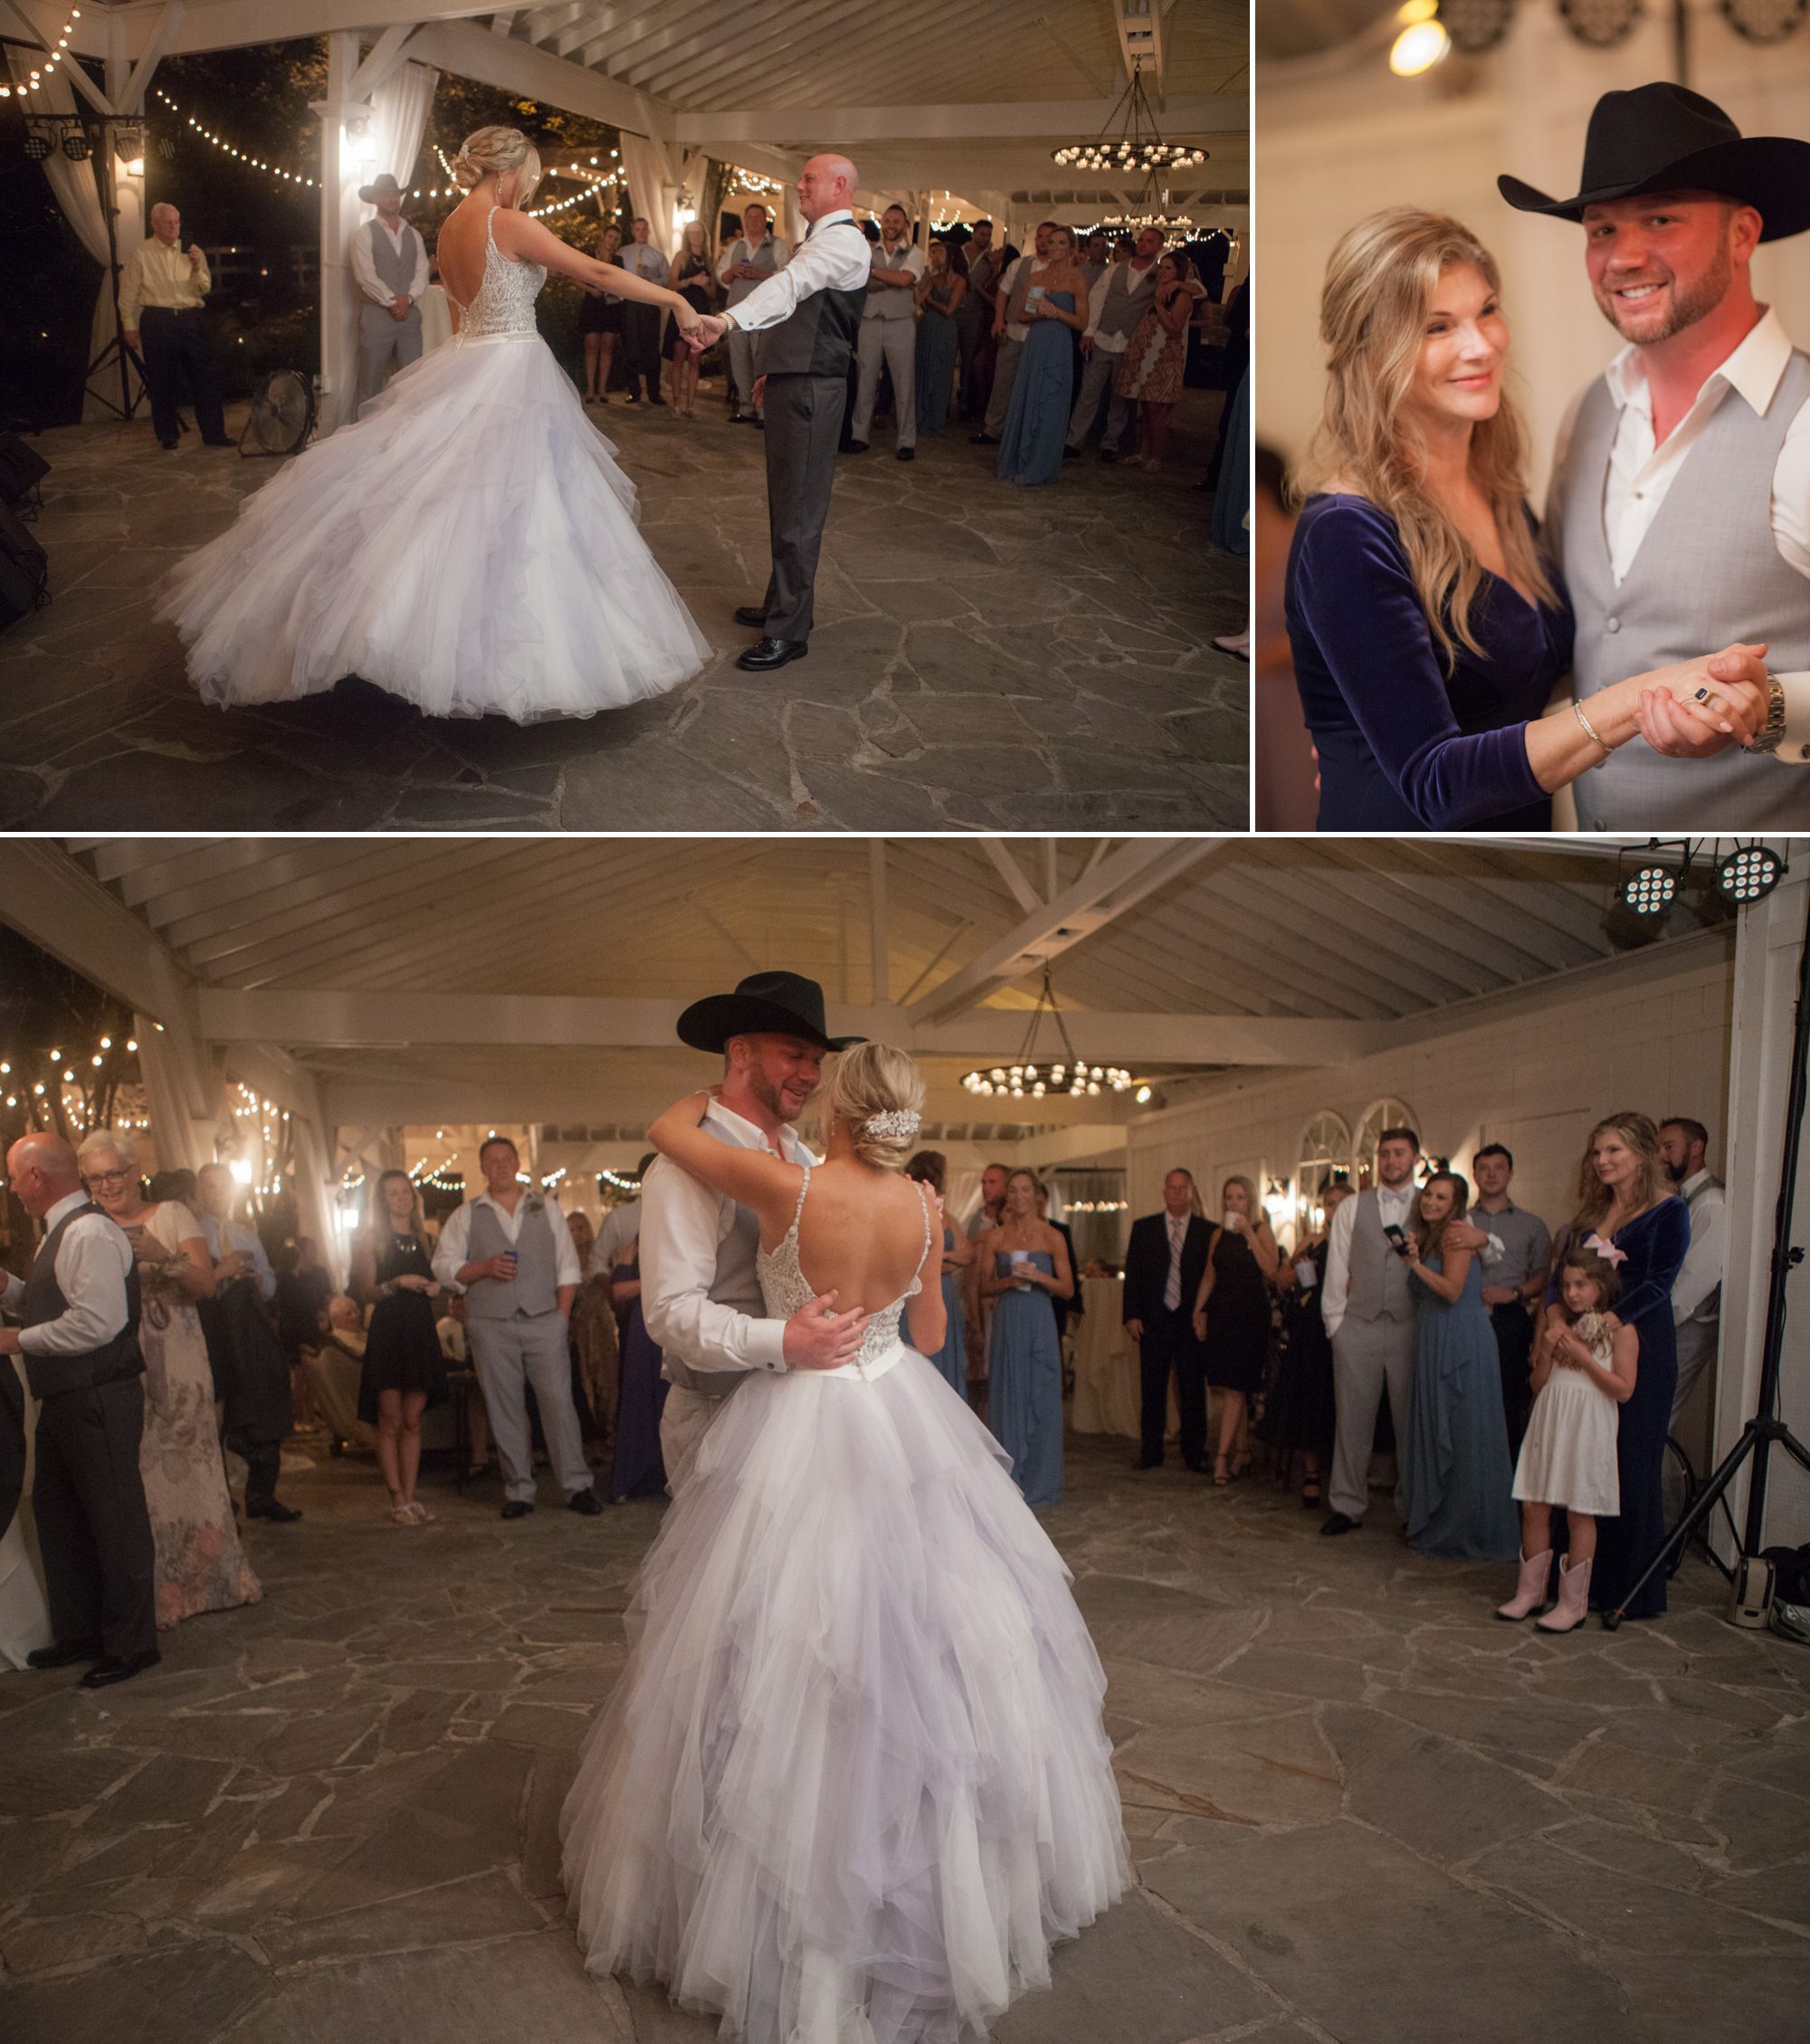 Photos of first dances at wedding reception. Wedding photography at Cedarwood Weddings and Estate in Nashville, TN photography by Krista Lee Photography